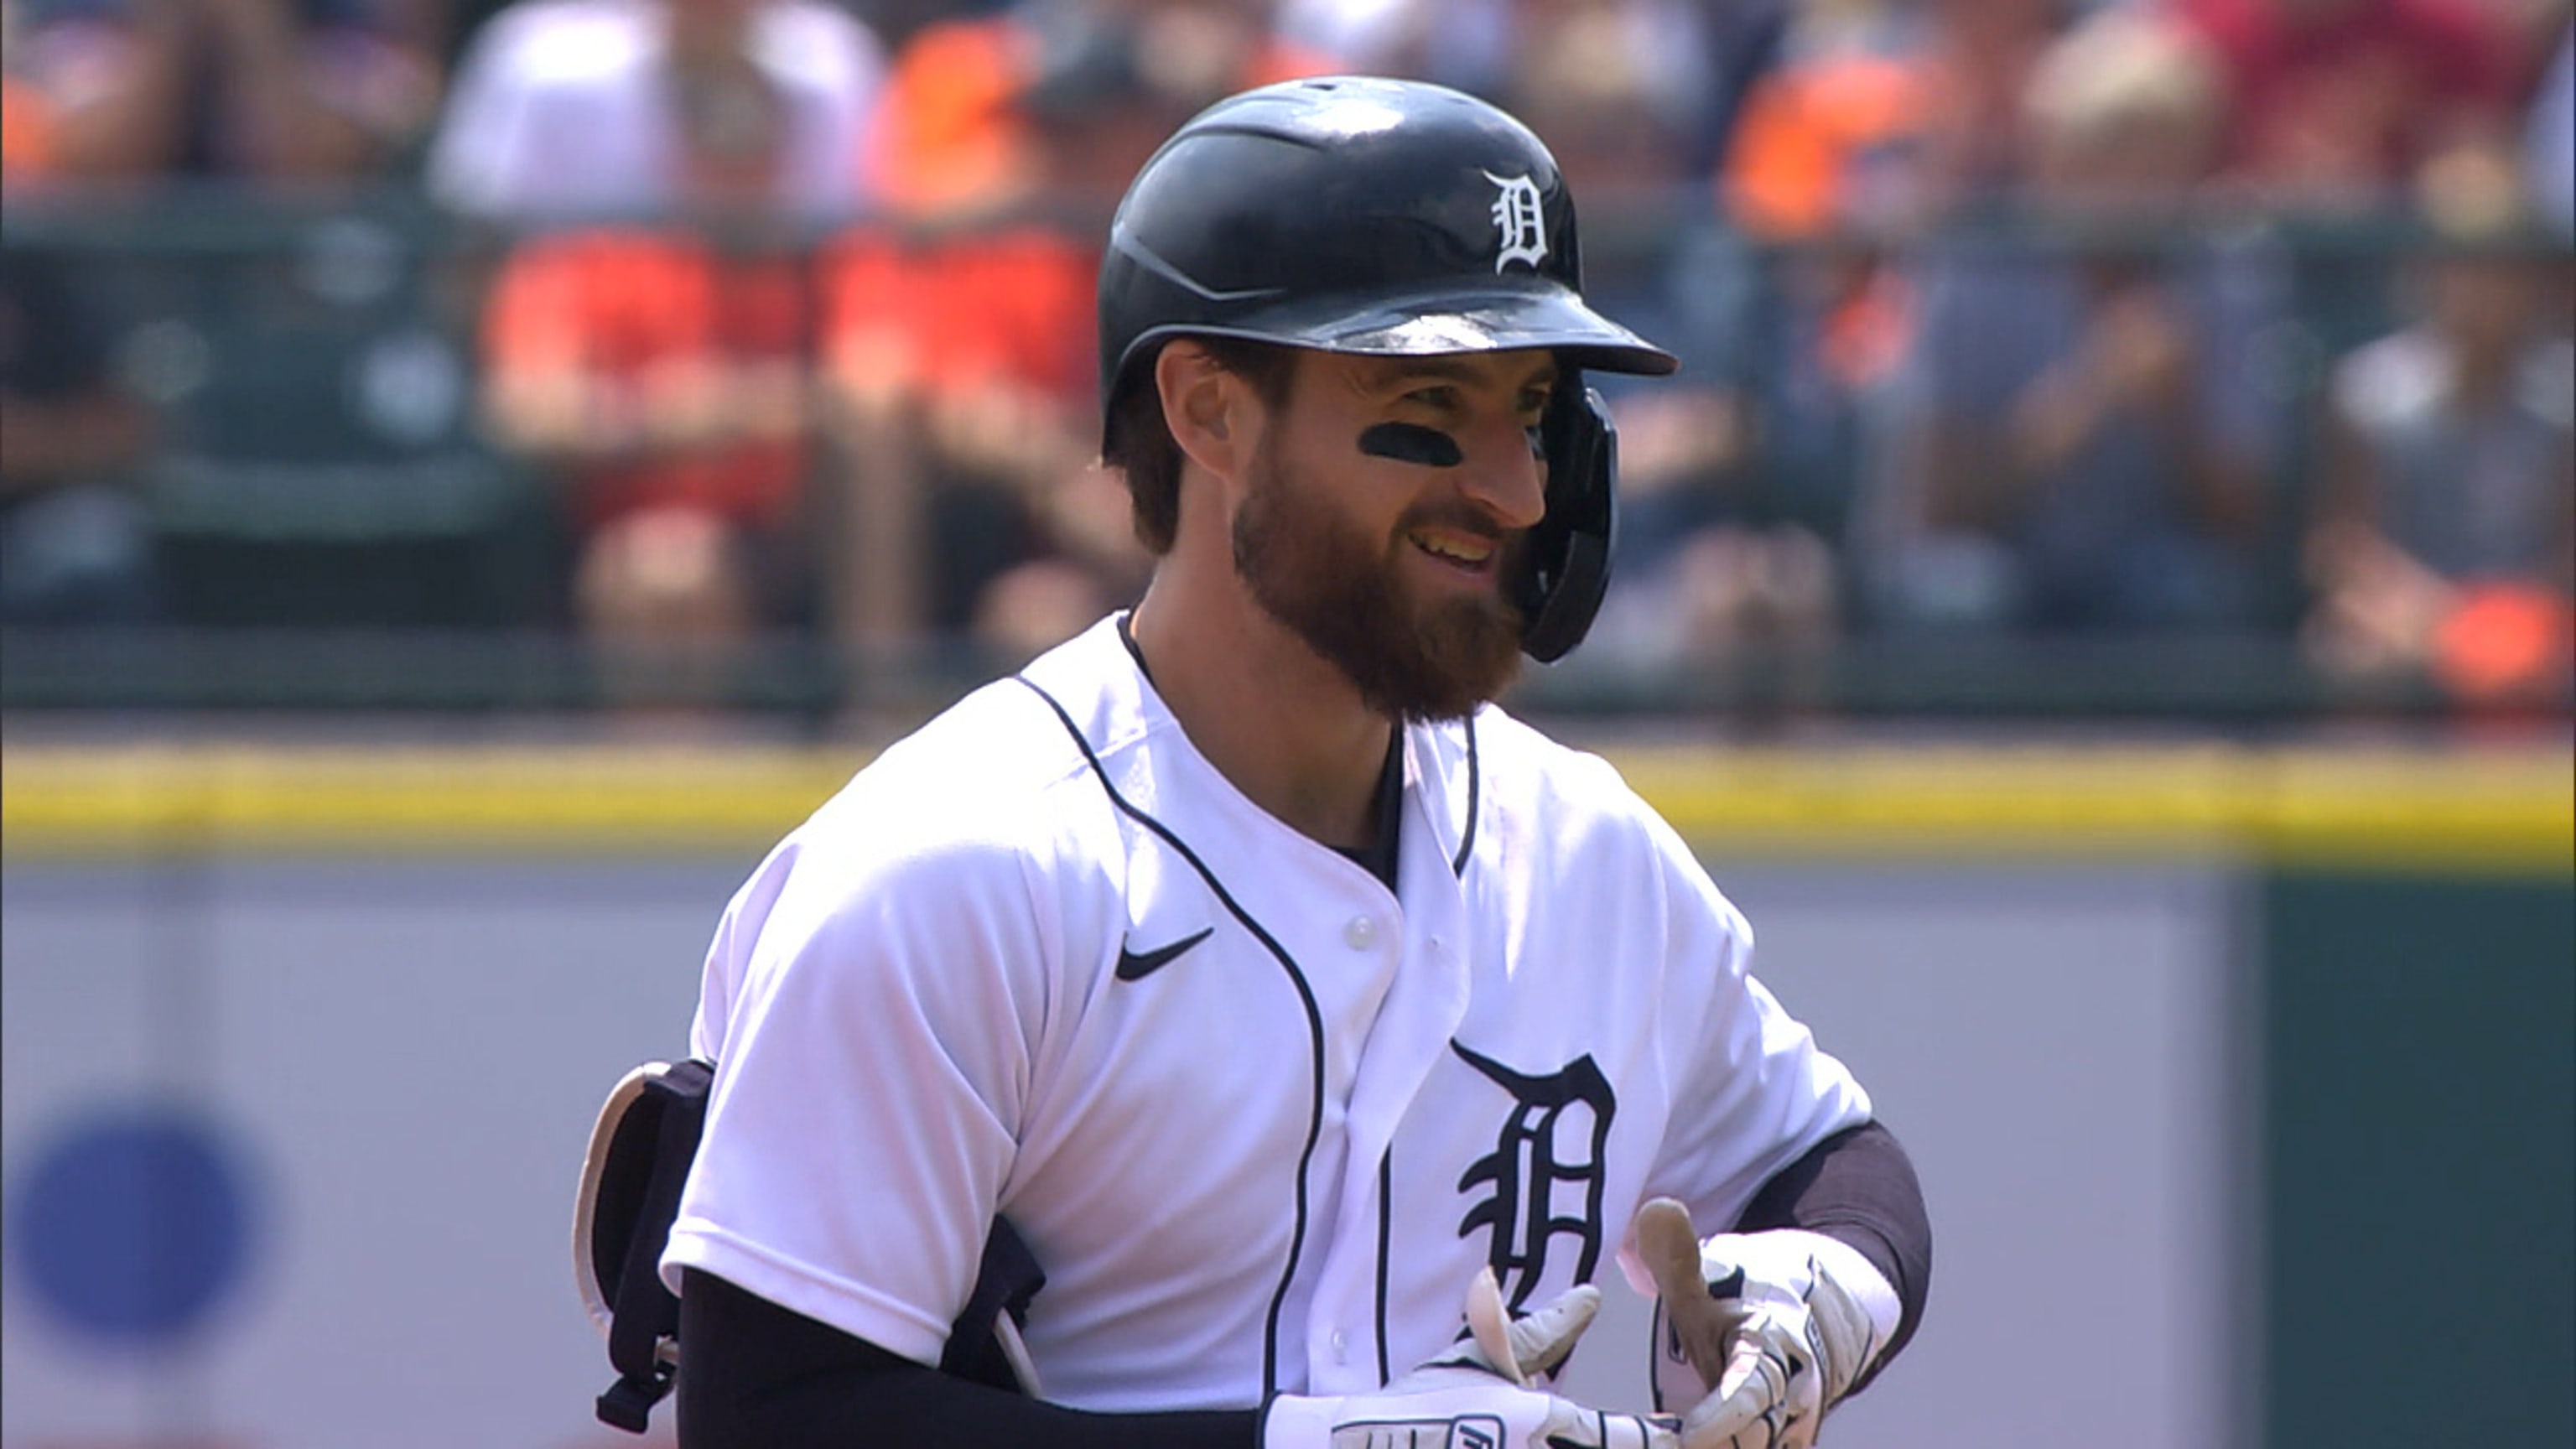 Could the Tigers actually move in the fences at Comerica Park? An